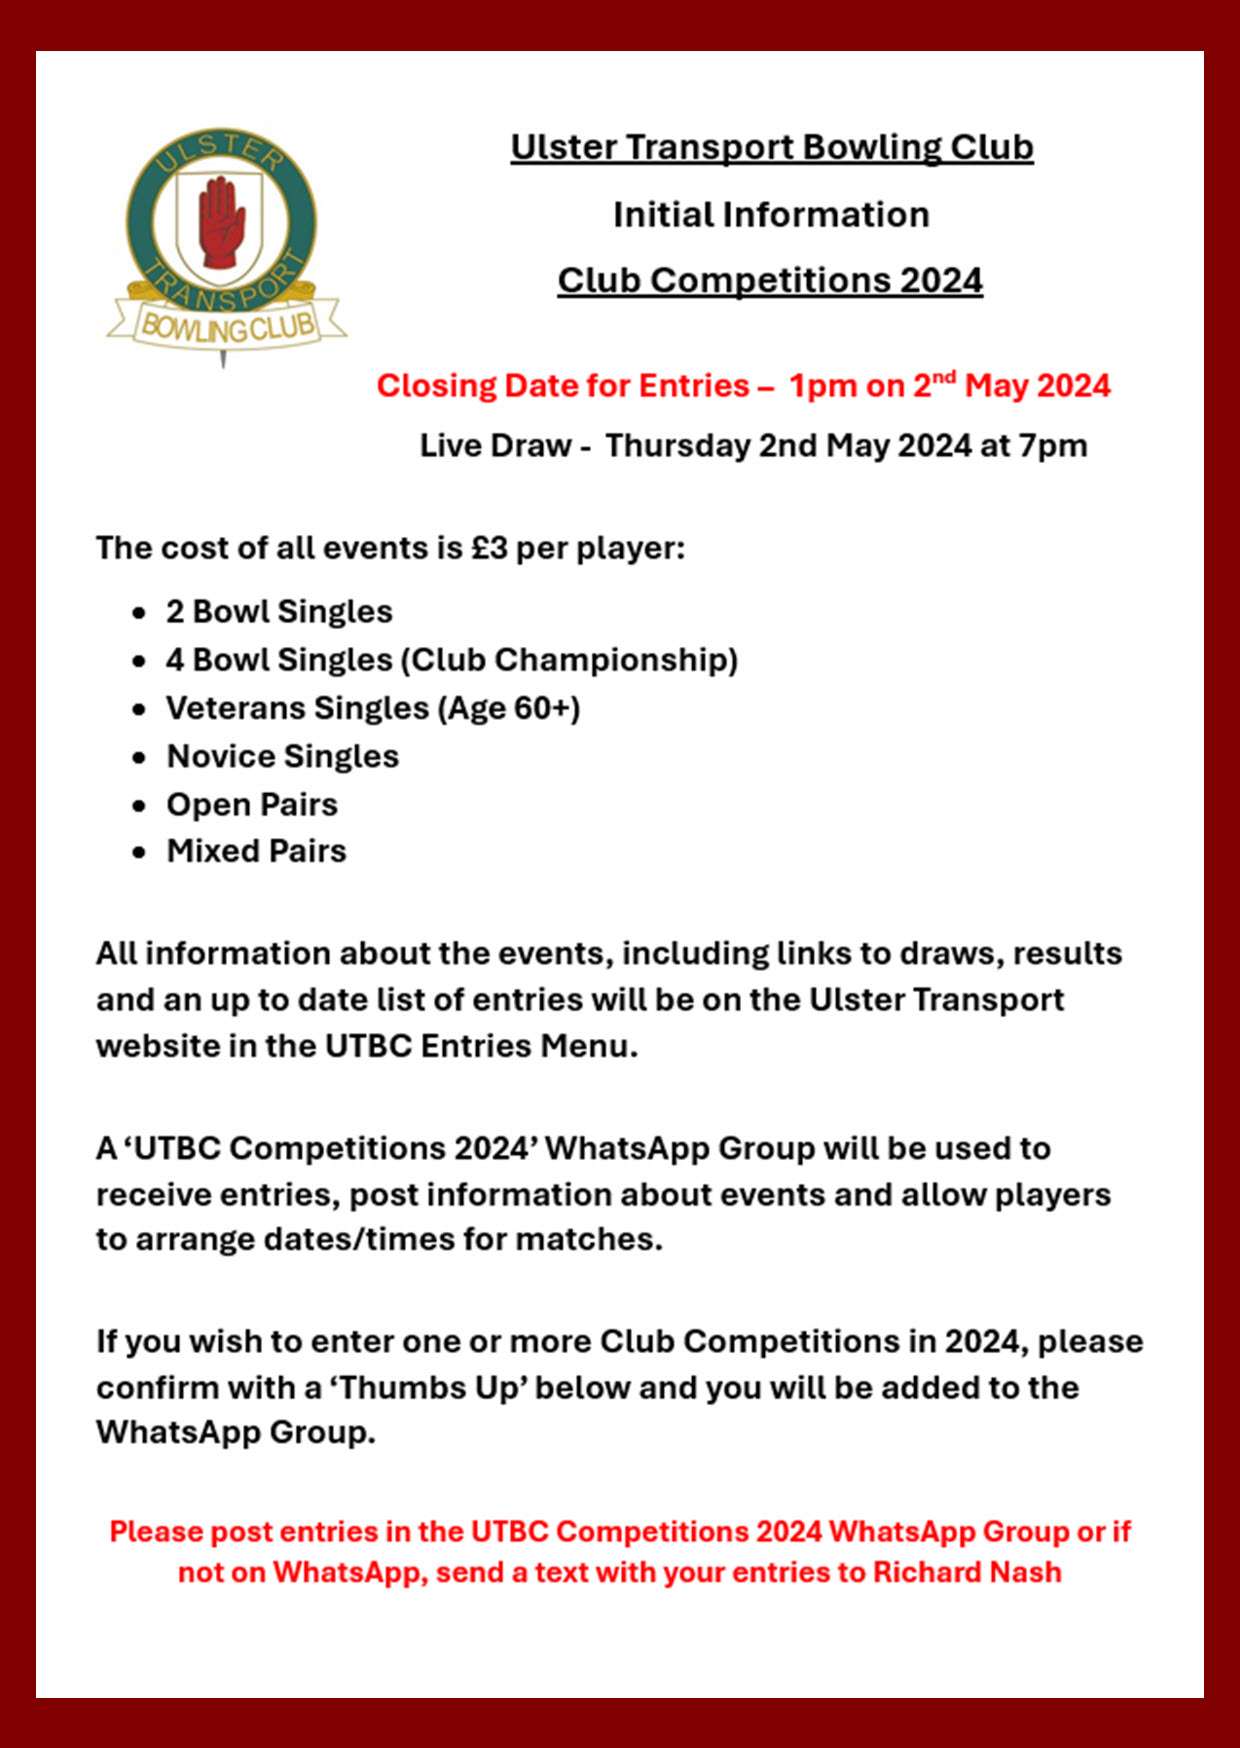 Information and Current Entries for the 2024 Club Competitions at Ulster Transport BC